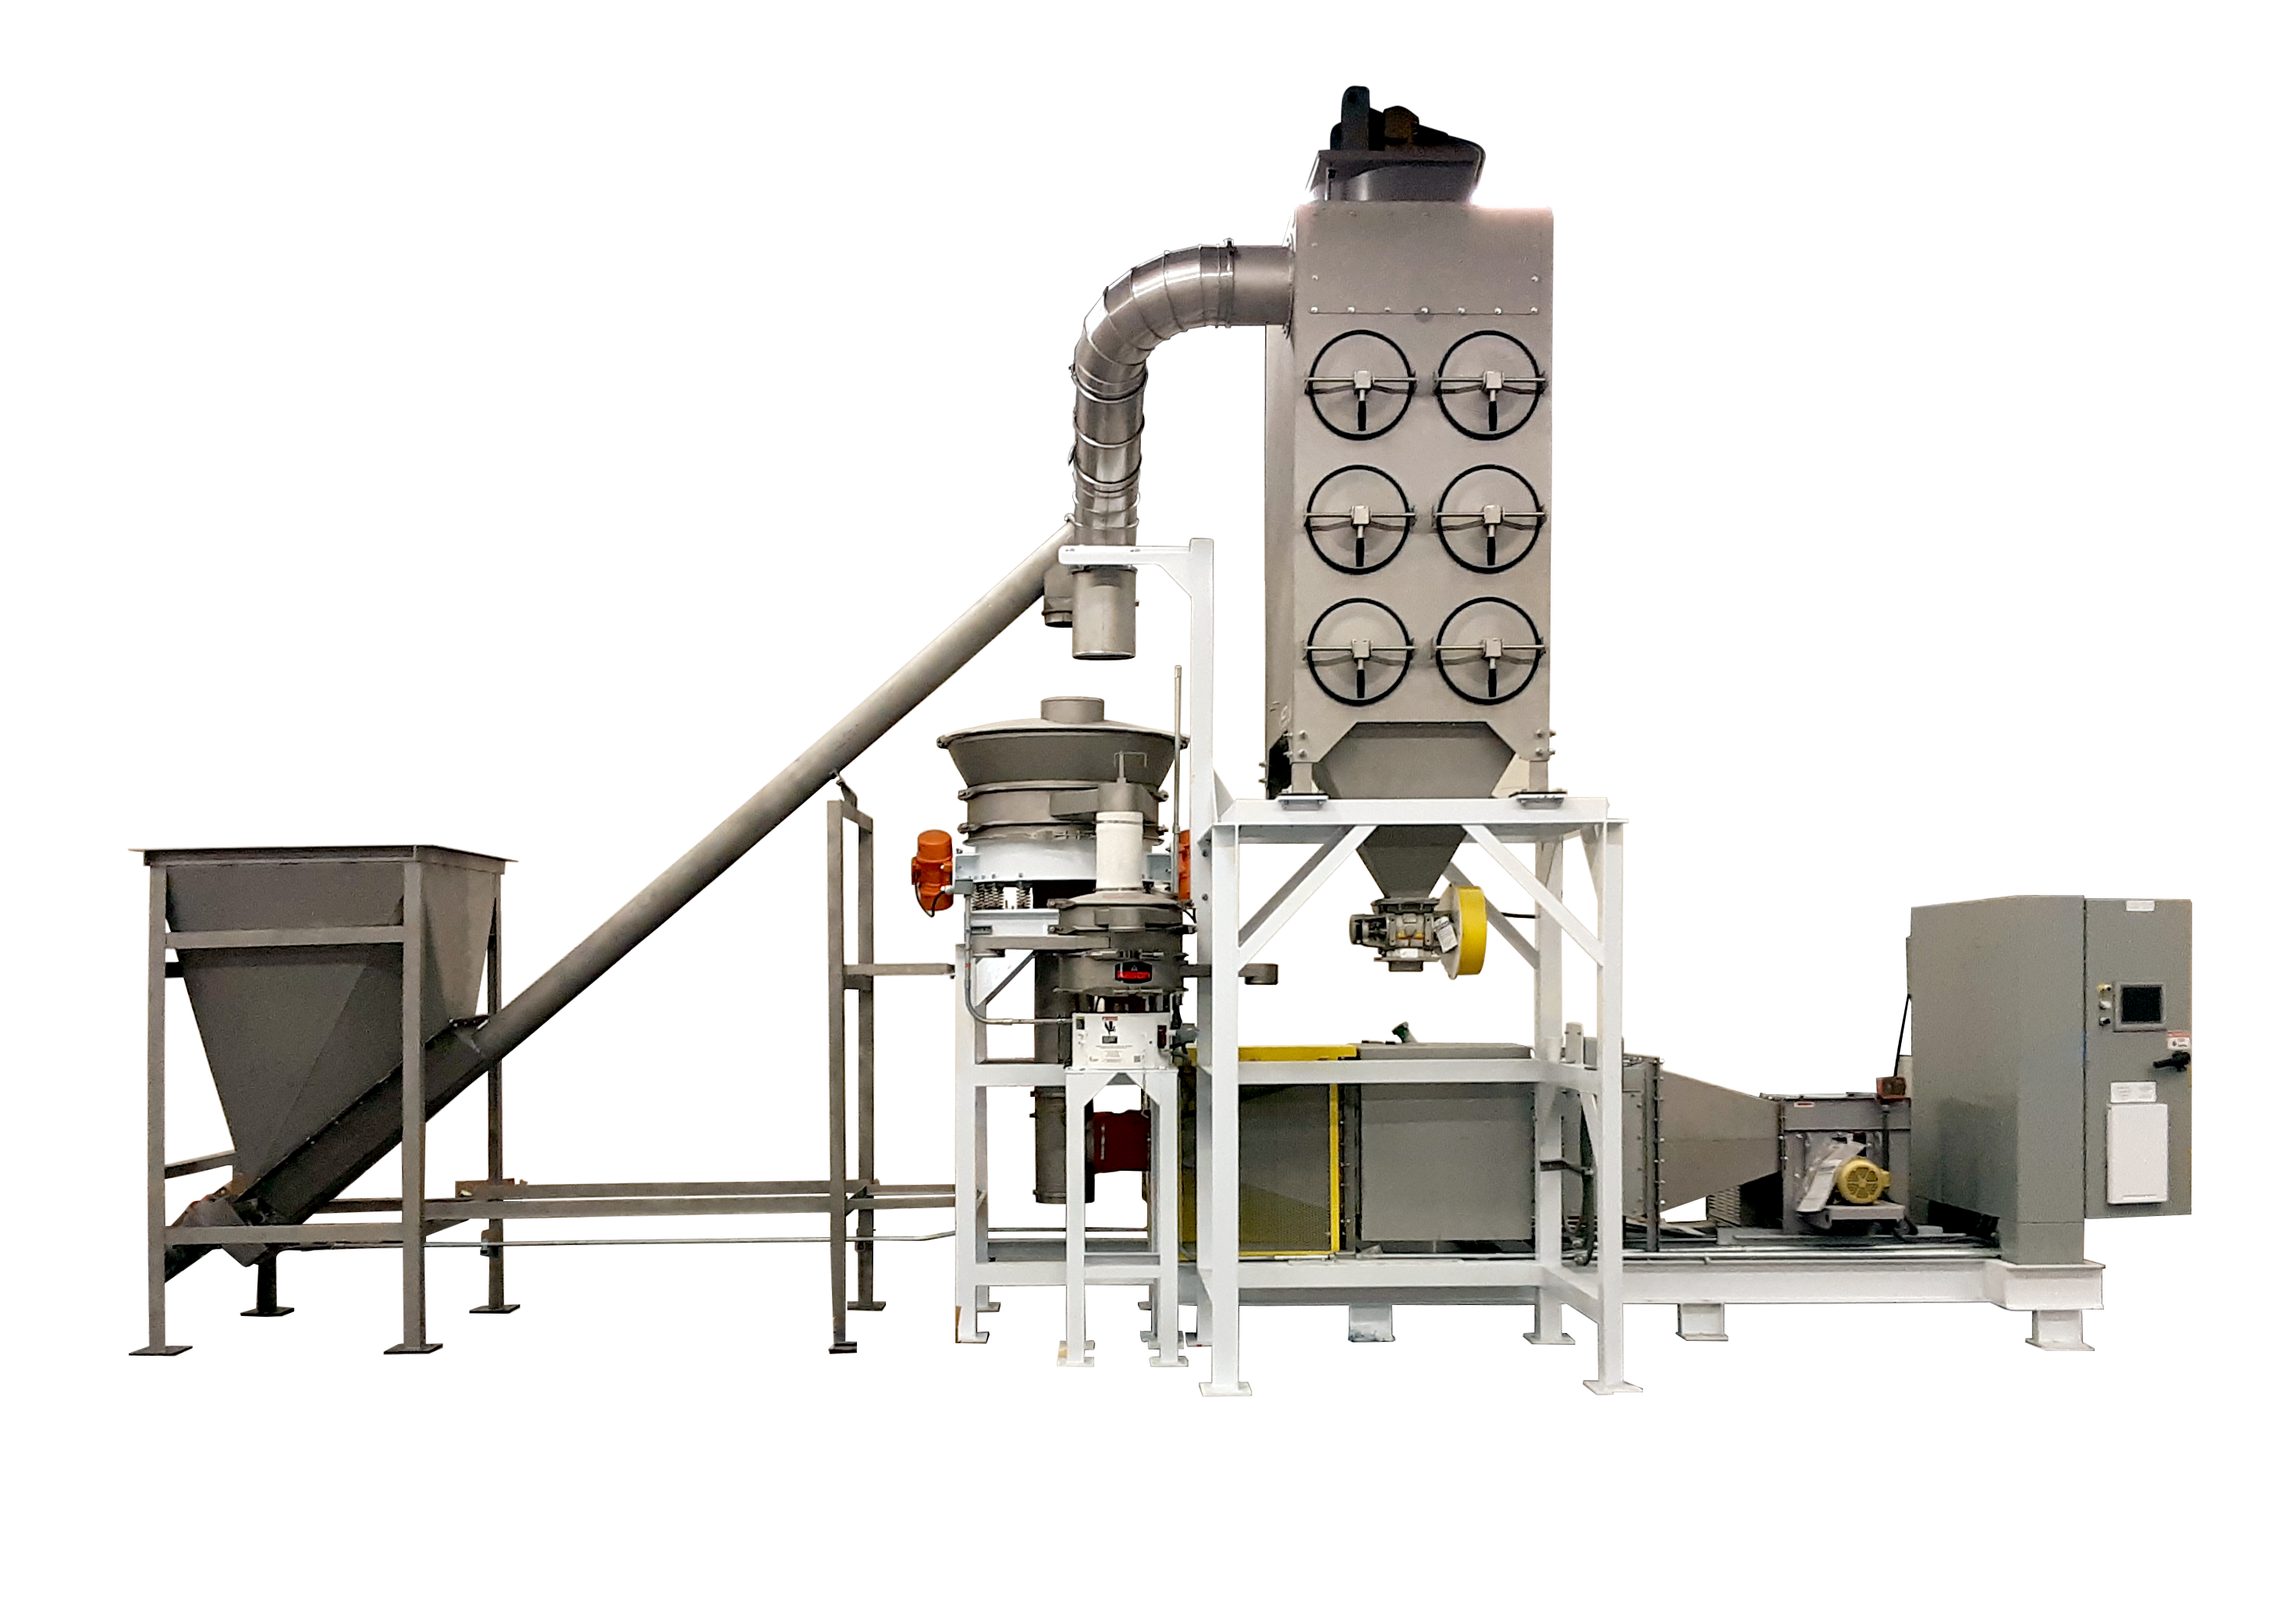 Kason Releases Two Cannabis Drying System Designs for a Wider Spectrum of Processing Volume Requirements